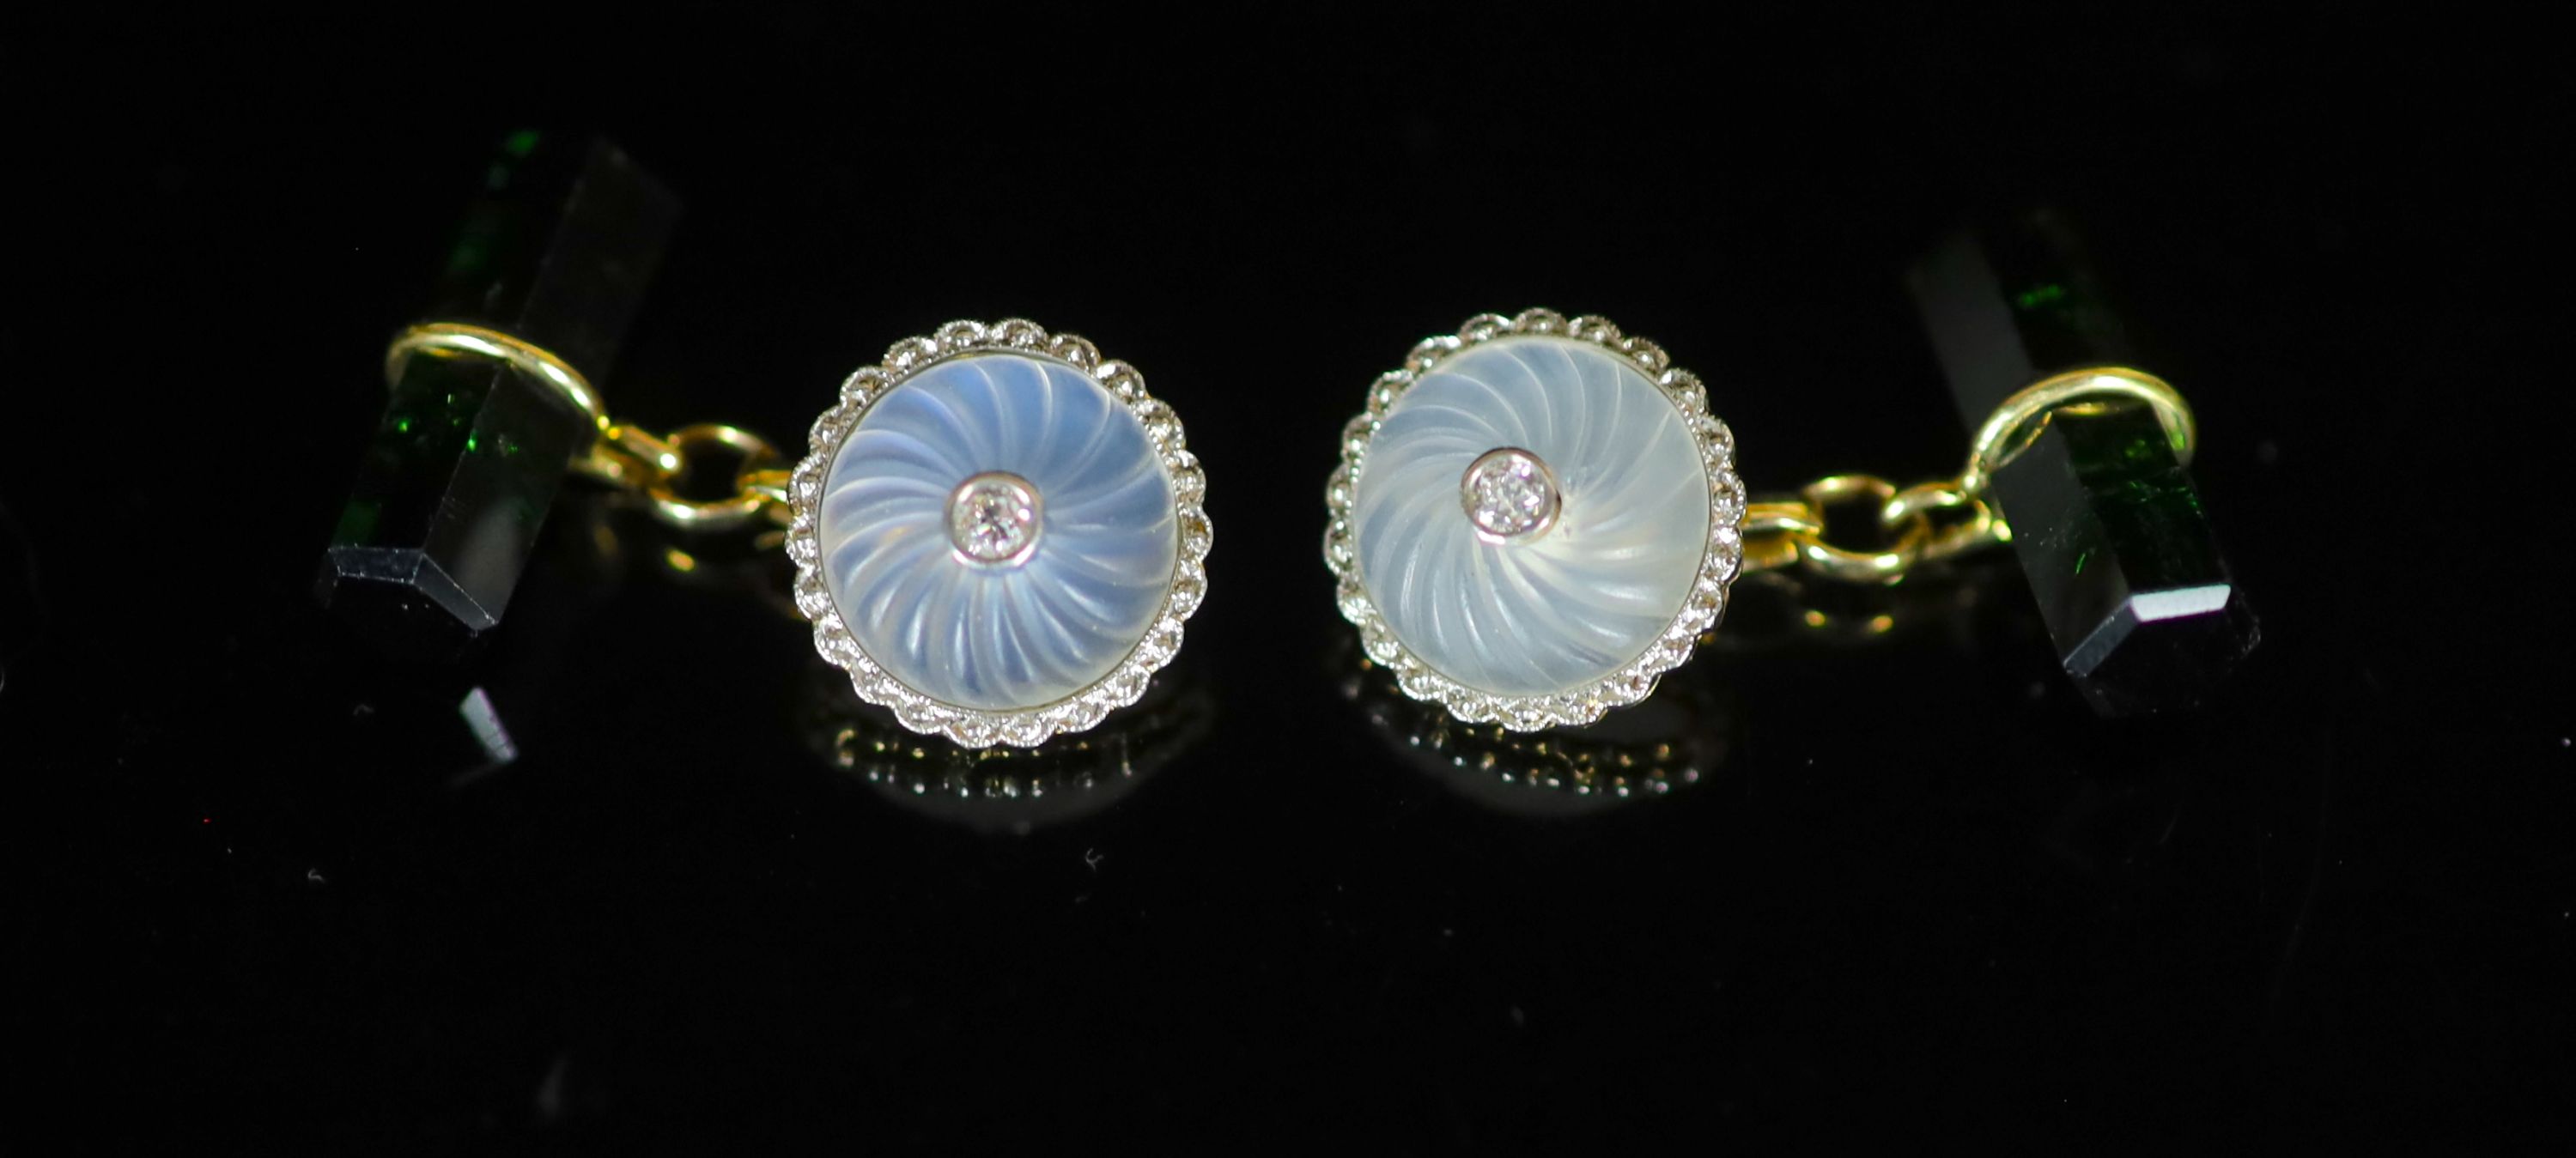 A pair of early 20th century gold, moonstone, diamond and tourmaline set cufflinks